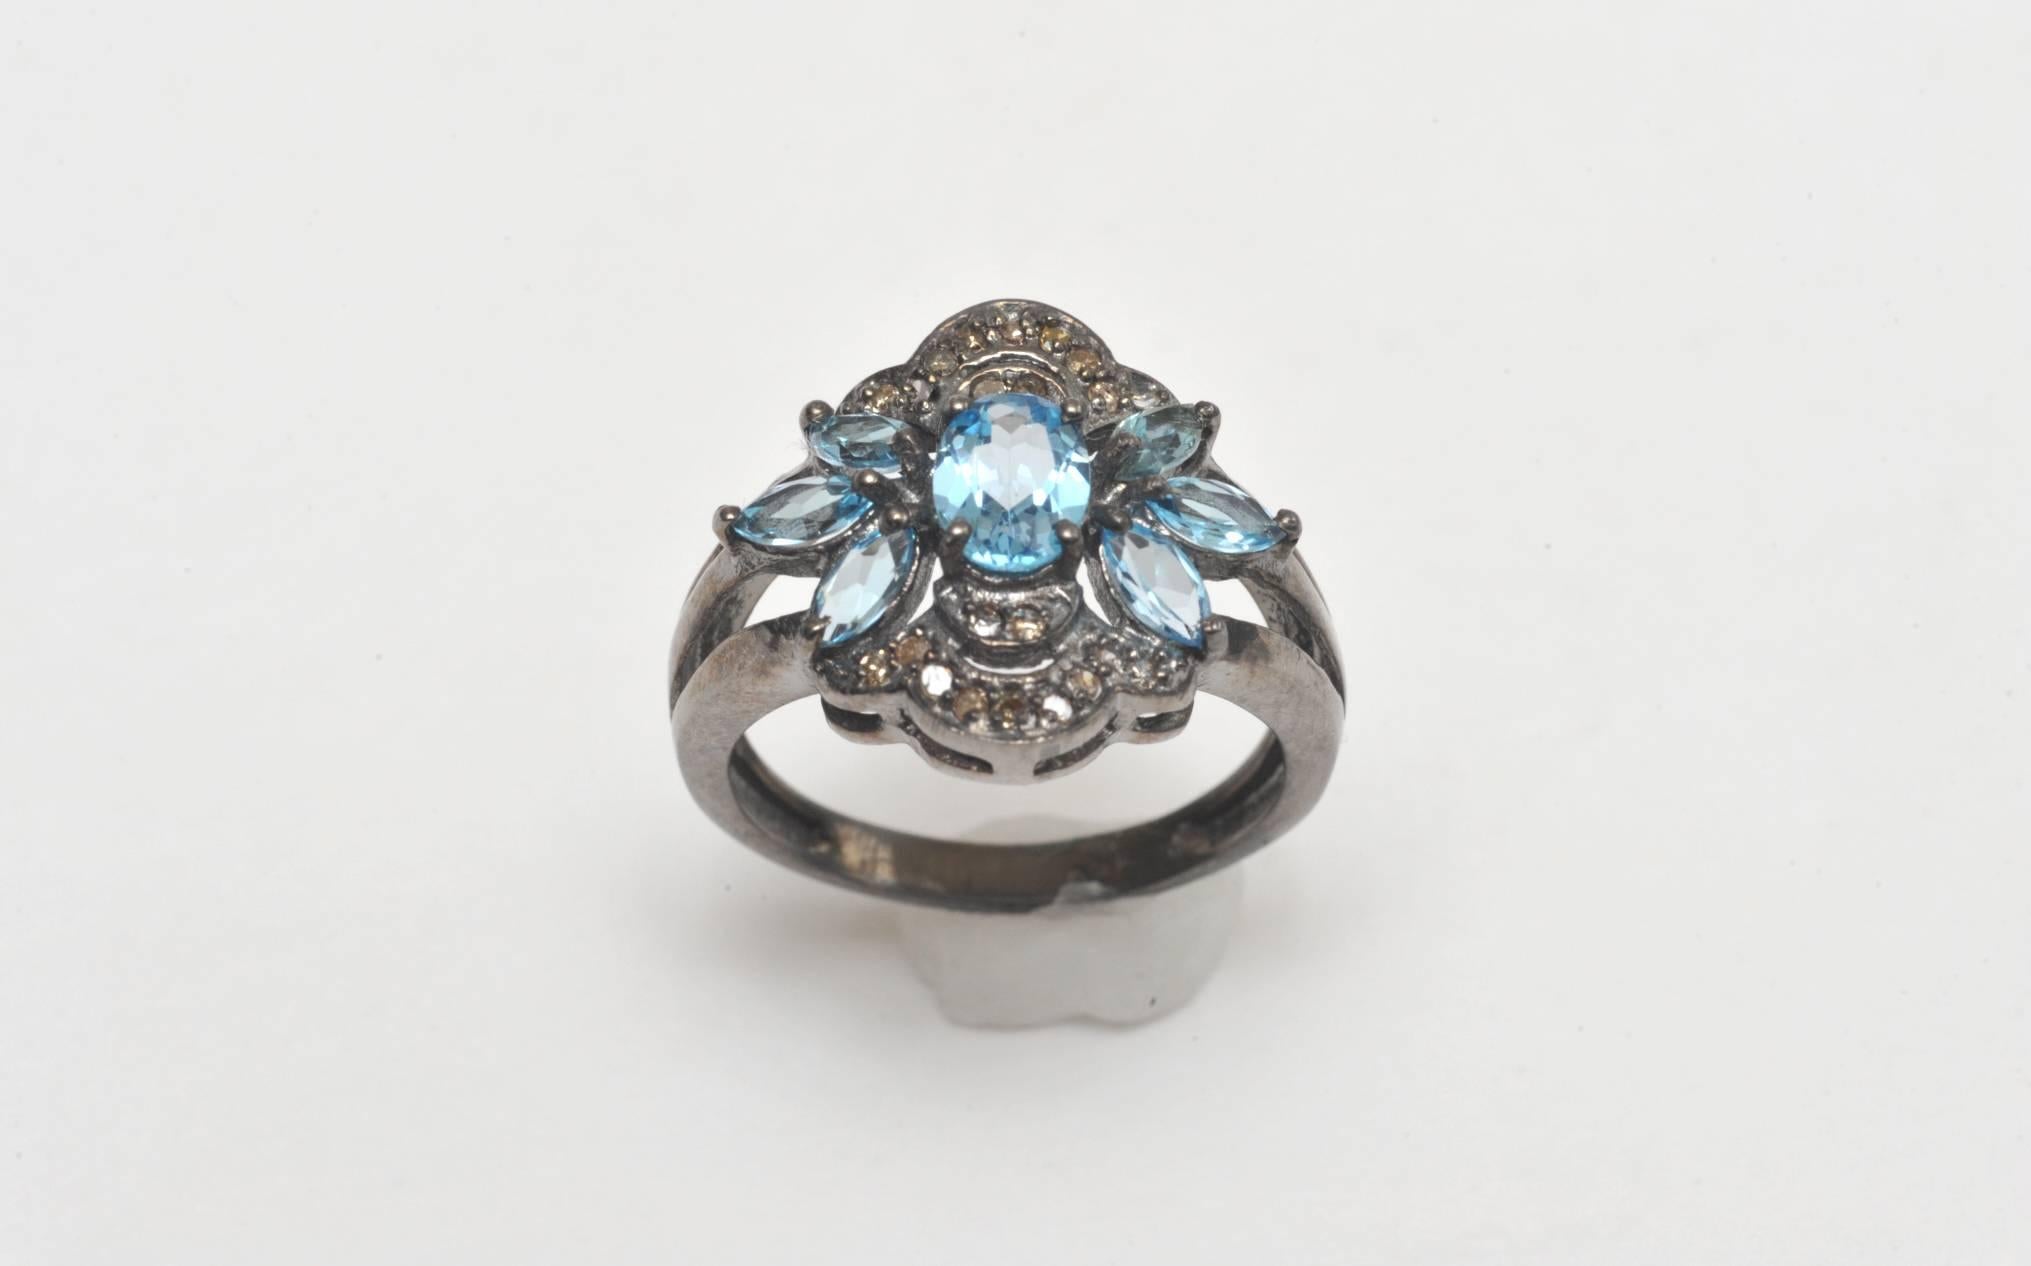 Faceted oval and marquise blue topaz stones set among pave`-set diamonds in oxidized sterling silver.  Ring size is 8.  Carat weight of blue topaz is 1.93 and diamonds are .19.